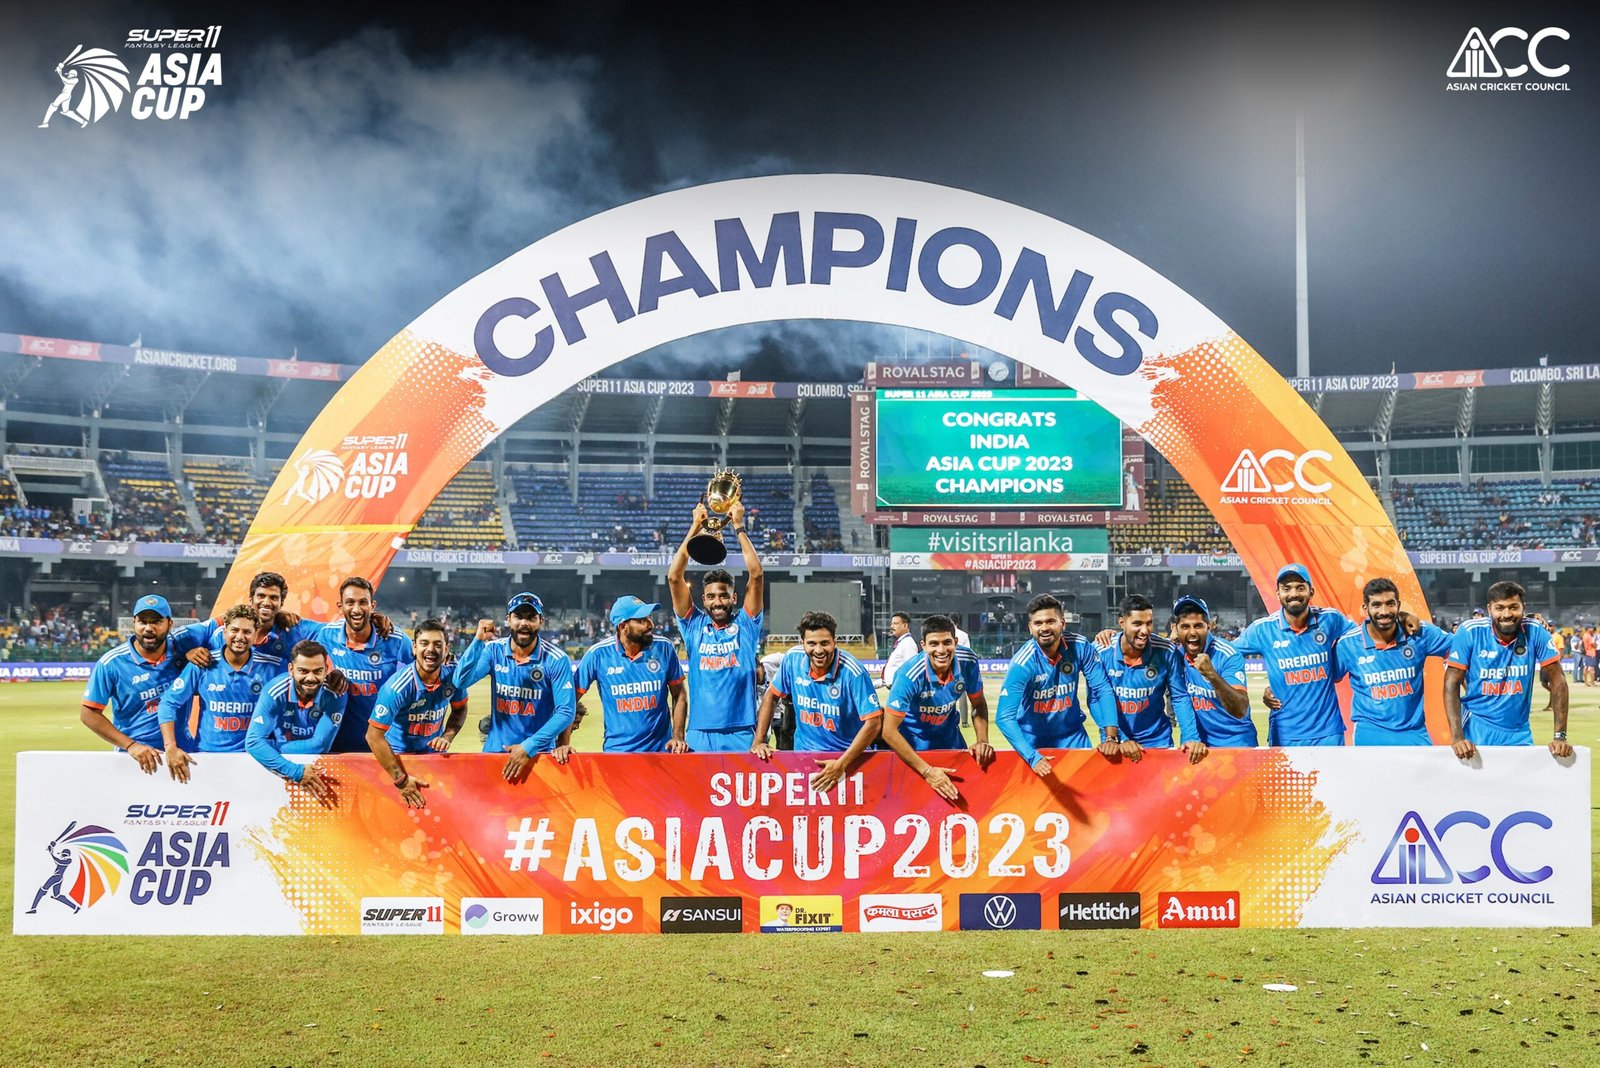 India Became Asia Cup Champion for the 8th Time by Defeating Sri Lanka for 10 Wickets